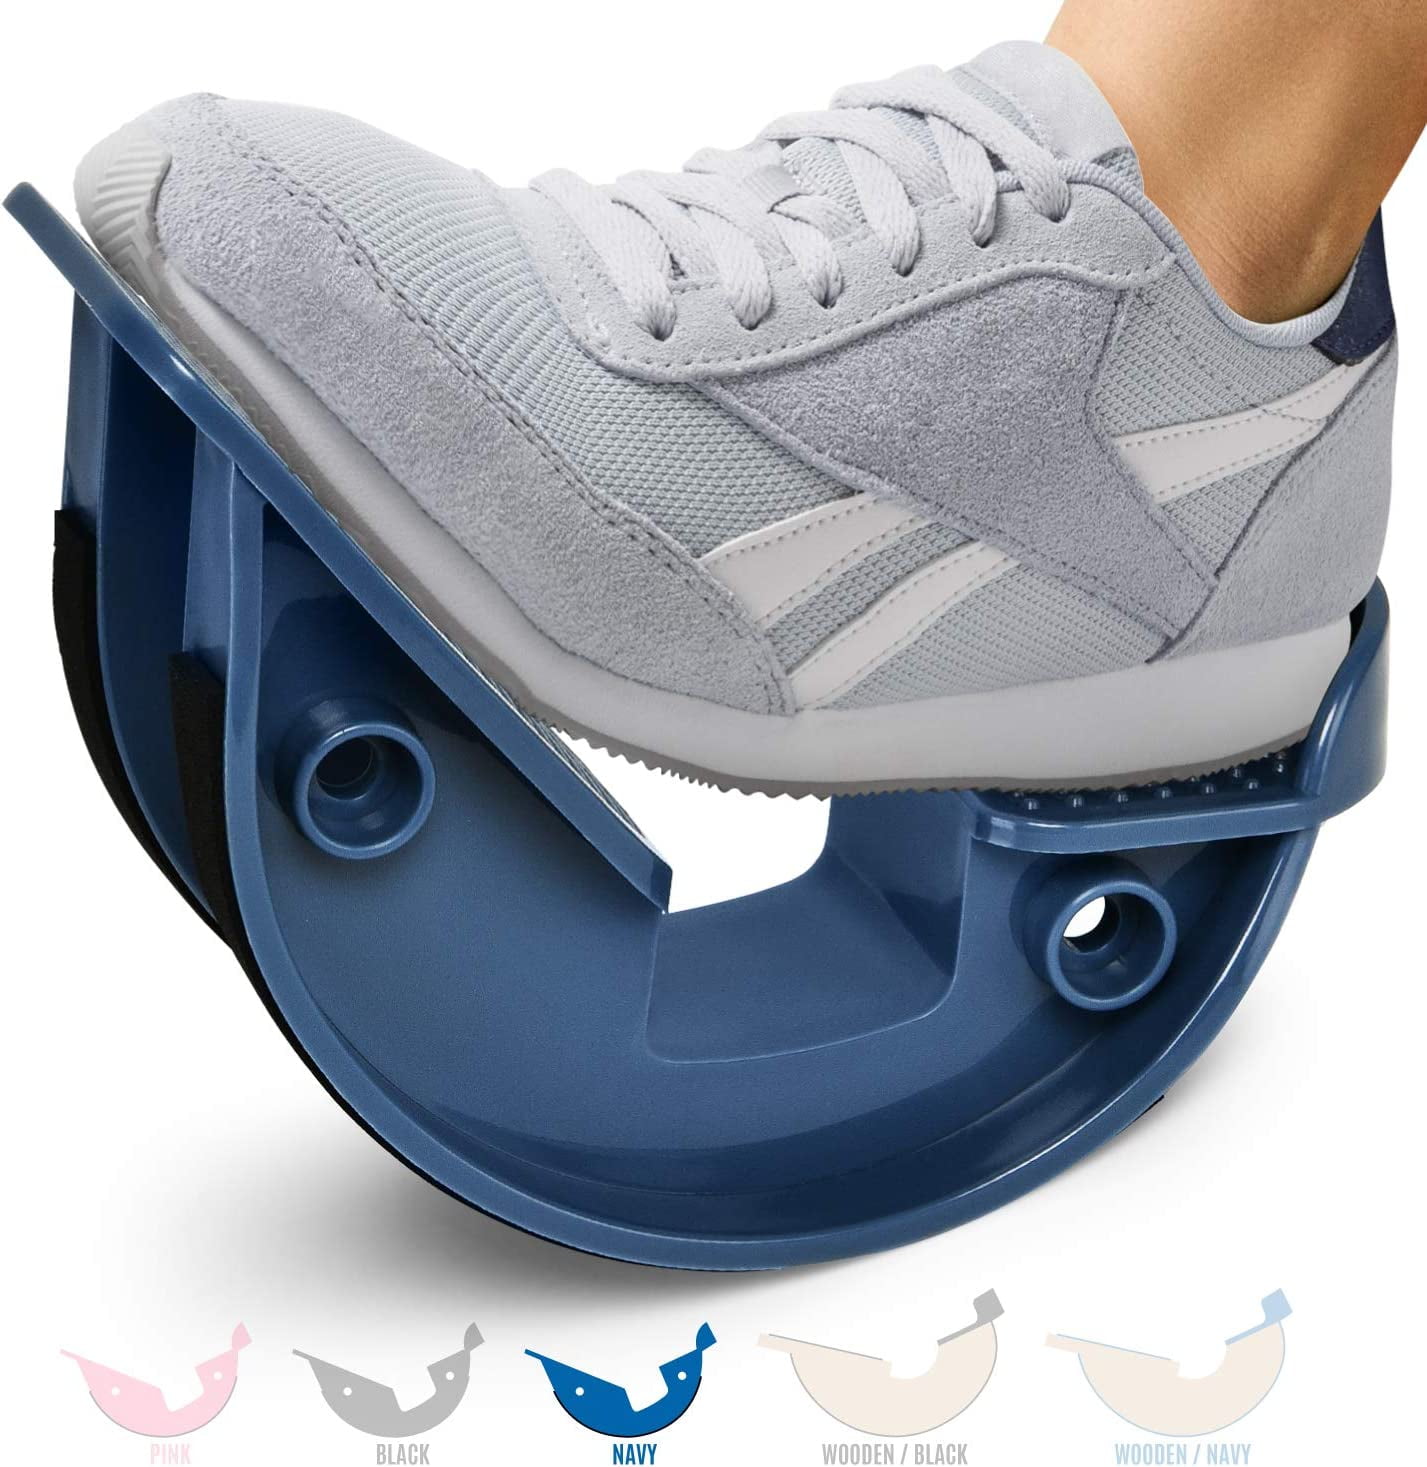 Zenmarkt Foot Stretcher and Calf Stretcher for Physical Therapy